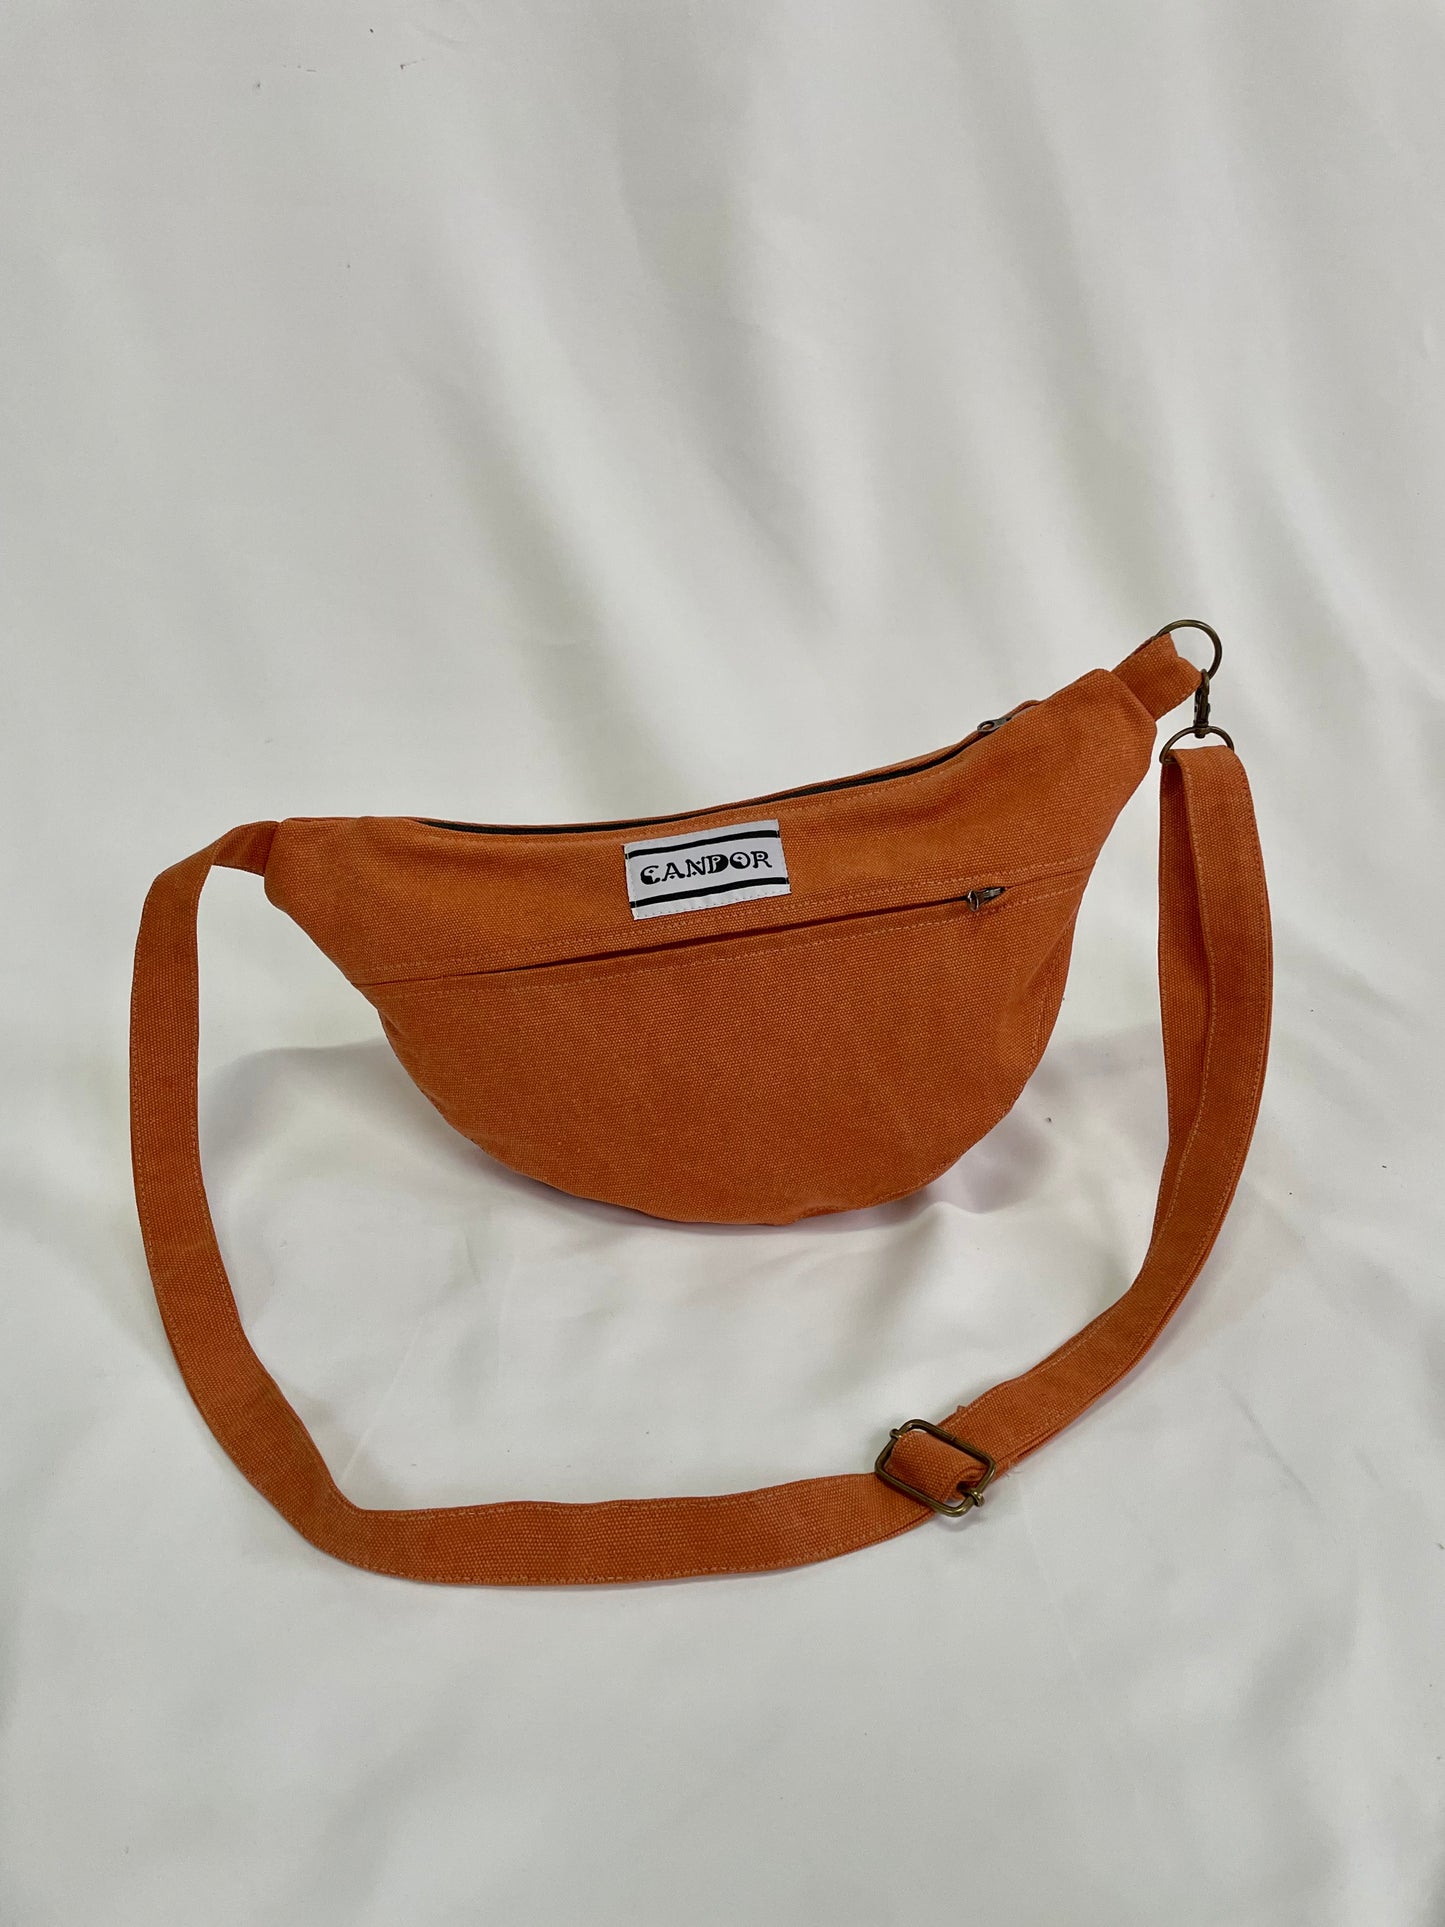 Orange sling bag with topstitching, brass hardware and YKK zips against a white backdrop.